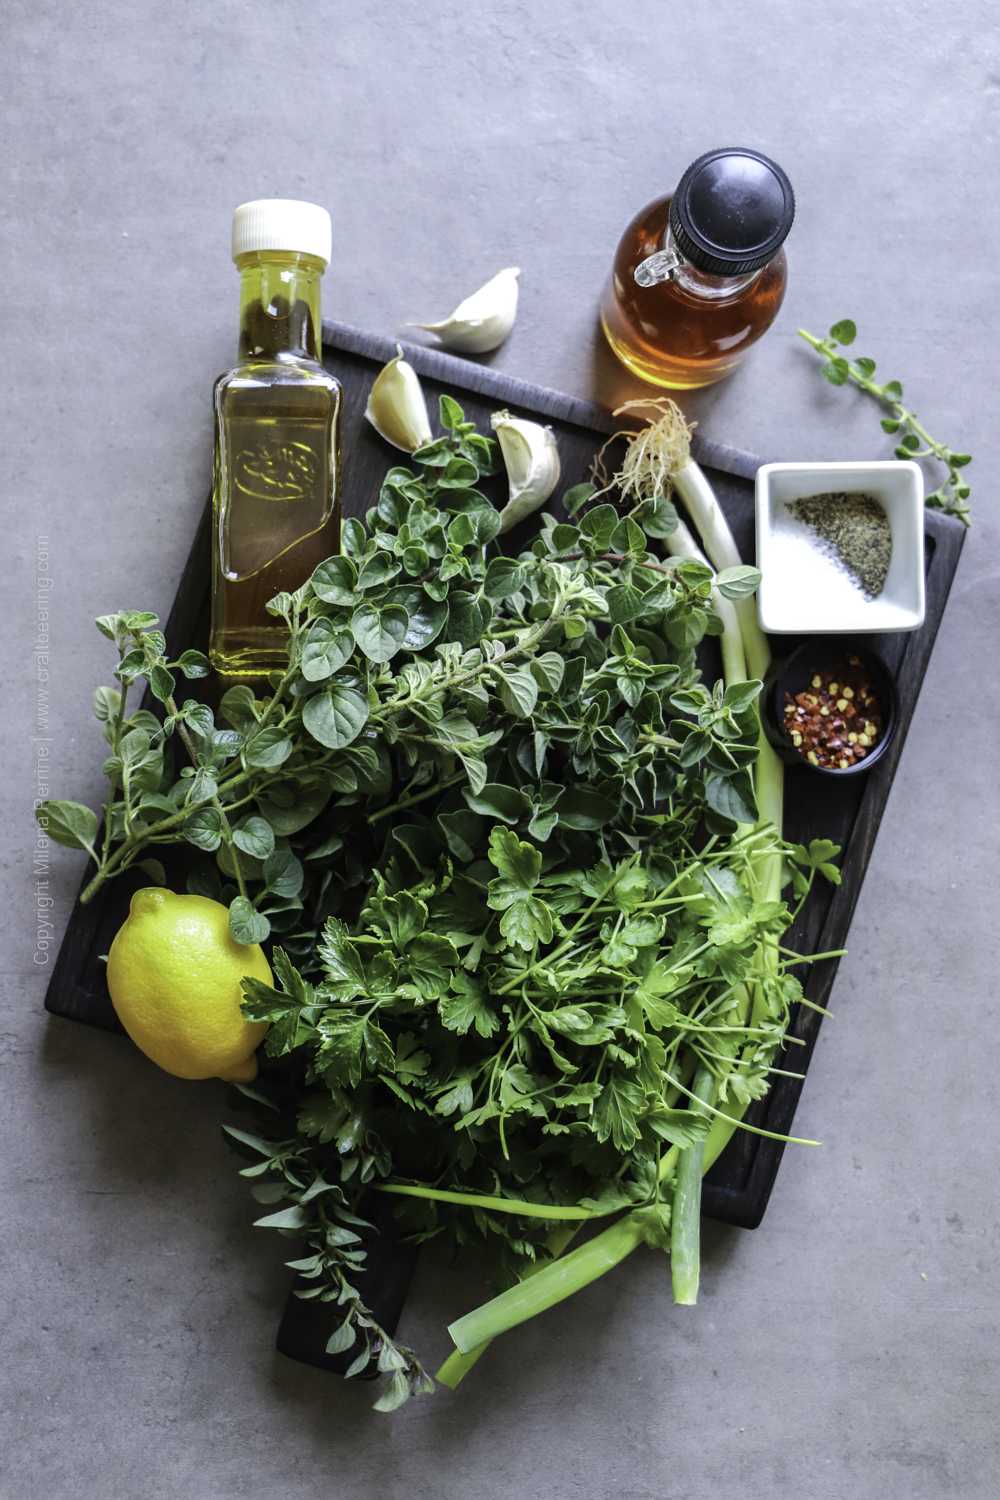 Fresh oregano, parsley and other ingredients for chimichurri